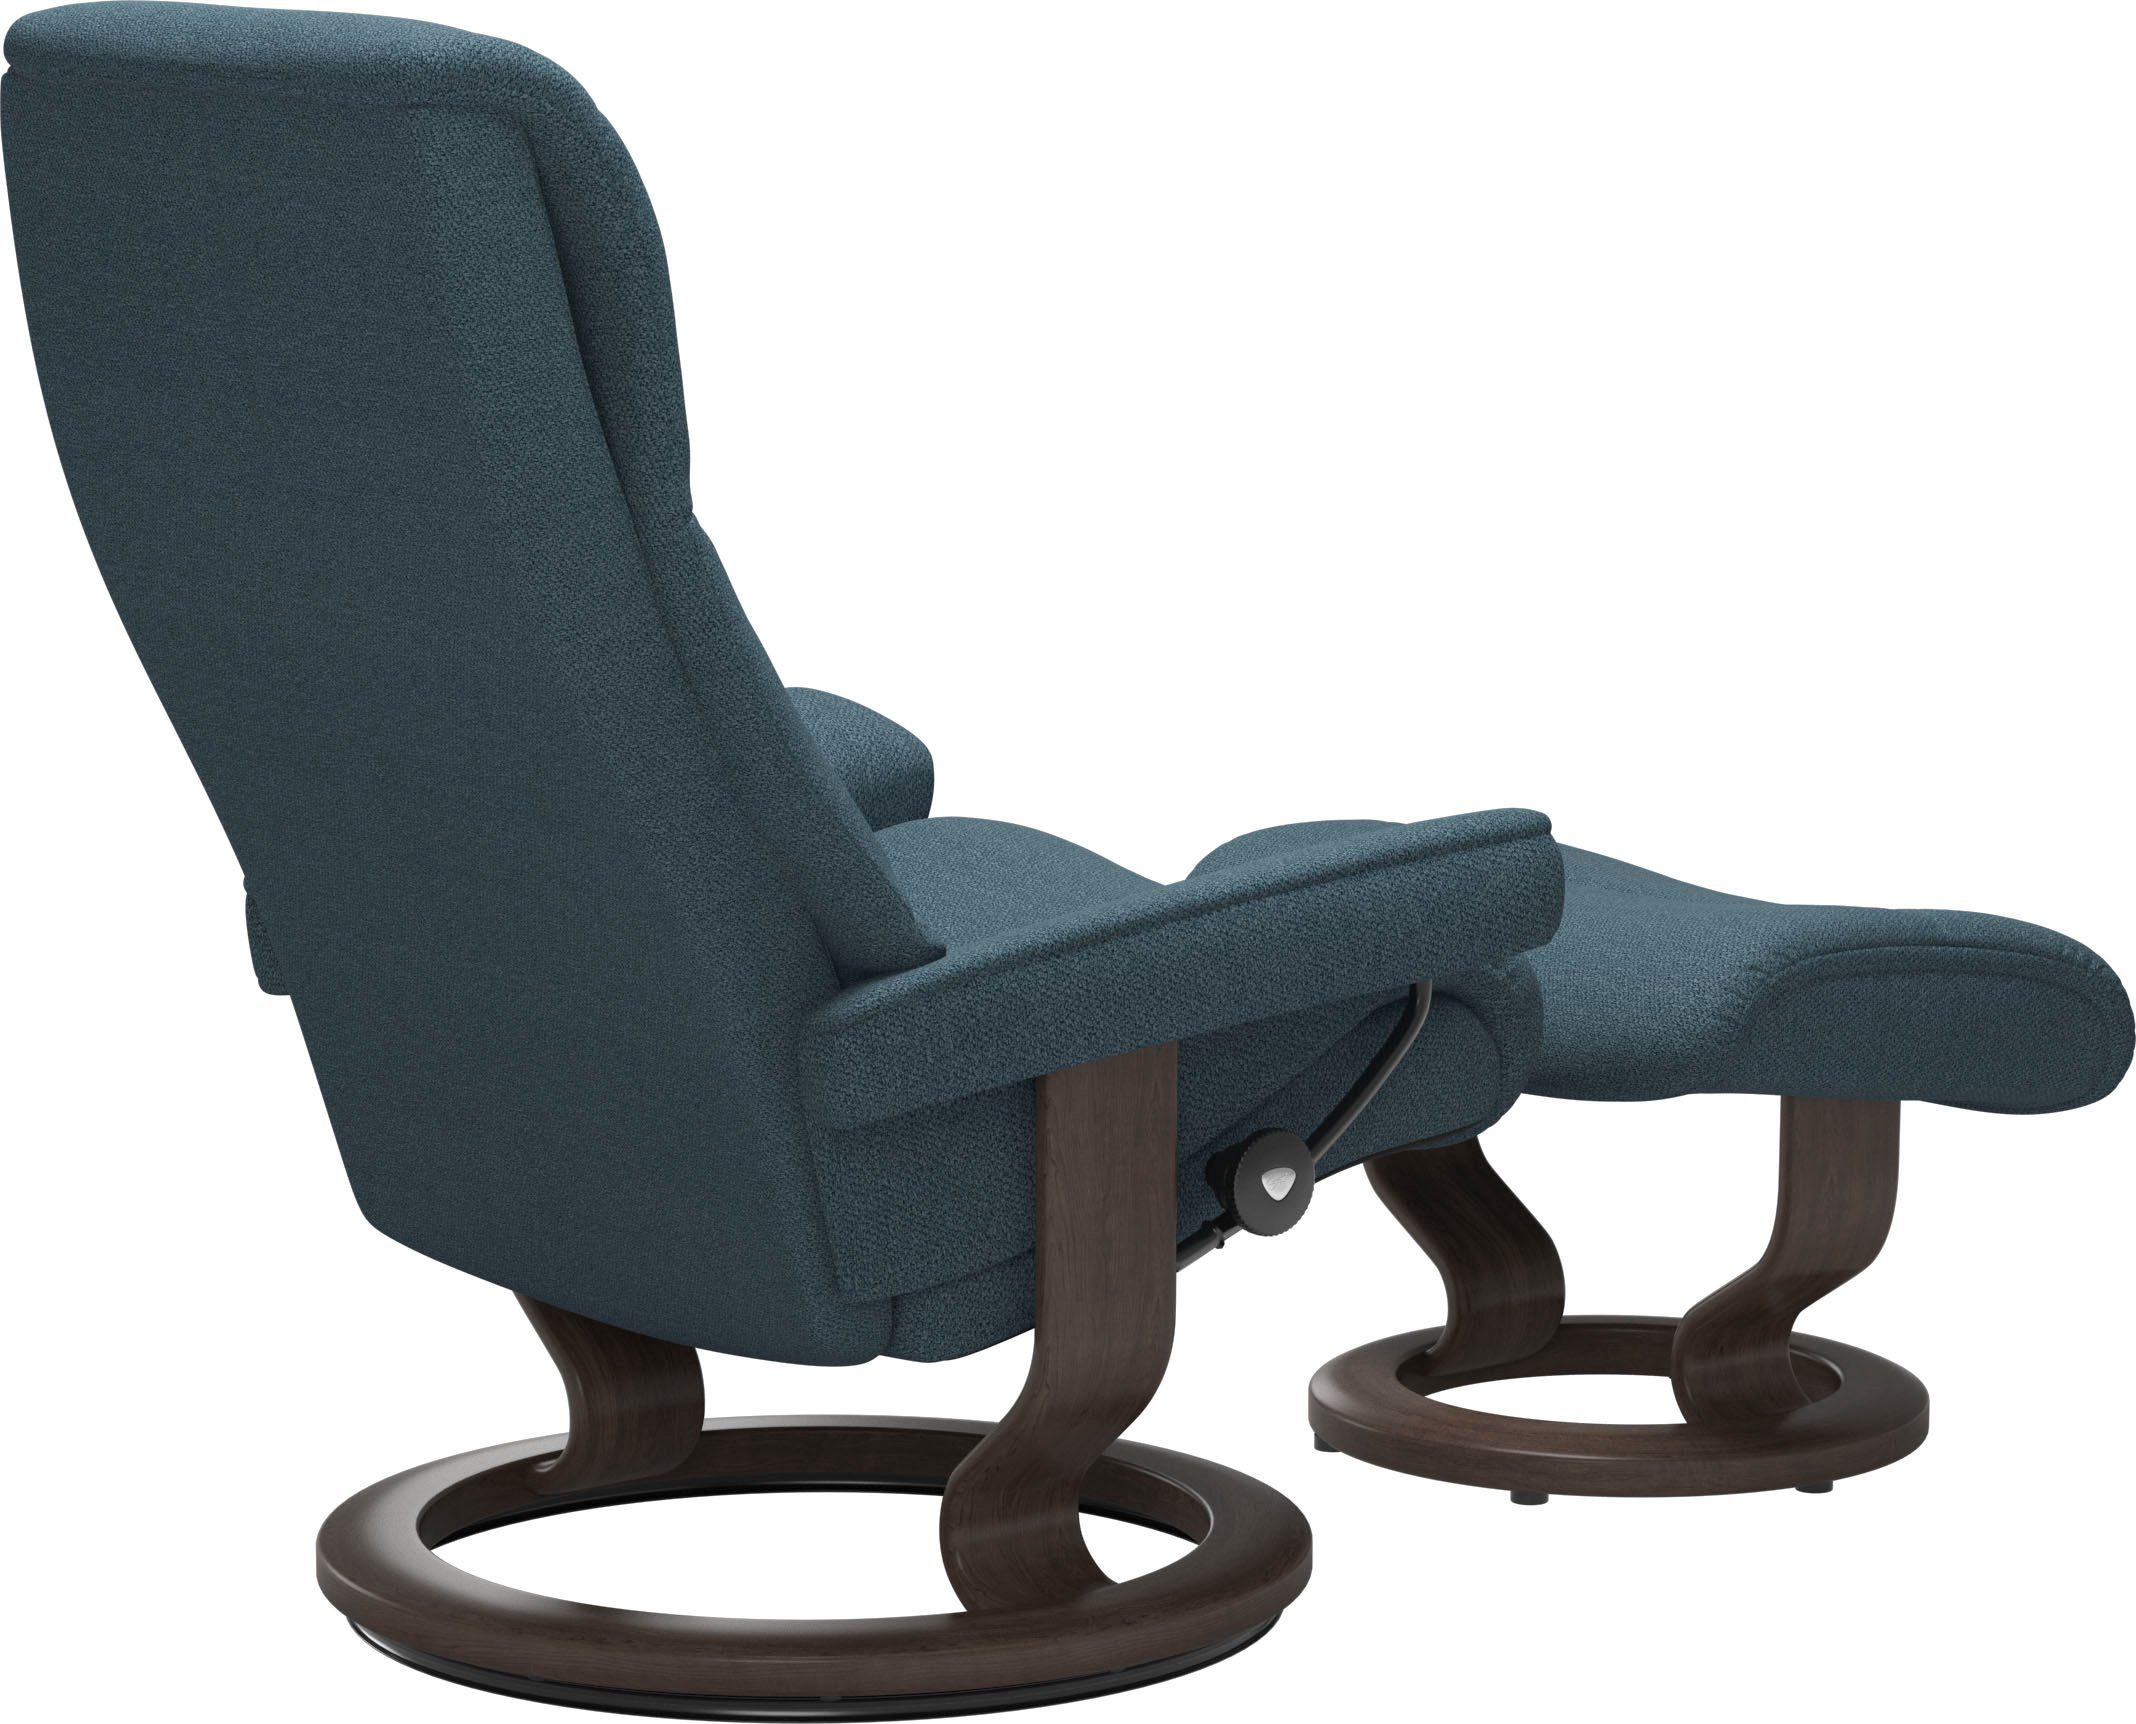 Base, Classic Wenge Relaxsessel Größe S,Gestell View, Stressless® mit